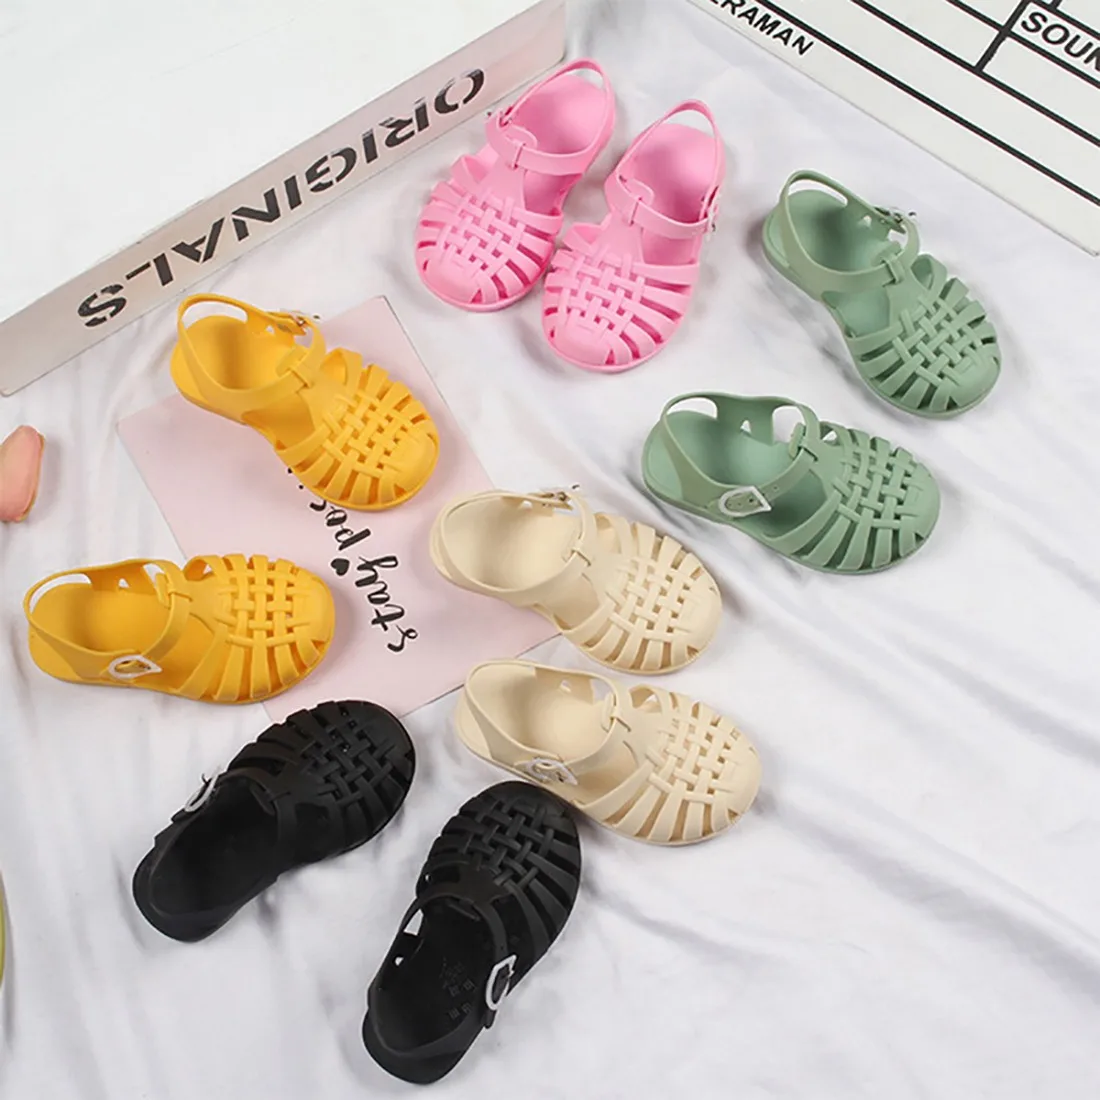 children's shoes for sale Baby Gladiator Sandals Breathable Hollow Out Shoes Pvc Summer Kids Shoes 2021 New Fashion Beach Children Sandals Boys Girls best leather shoes